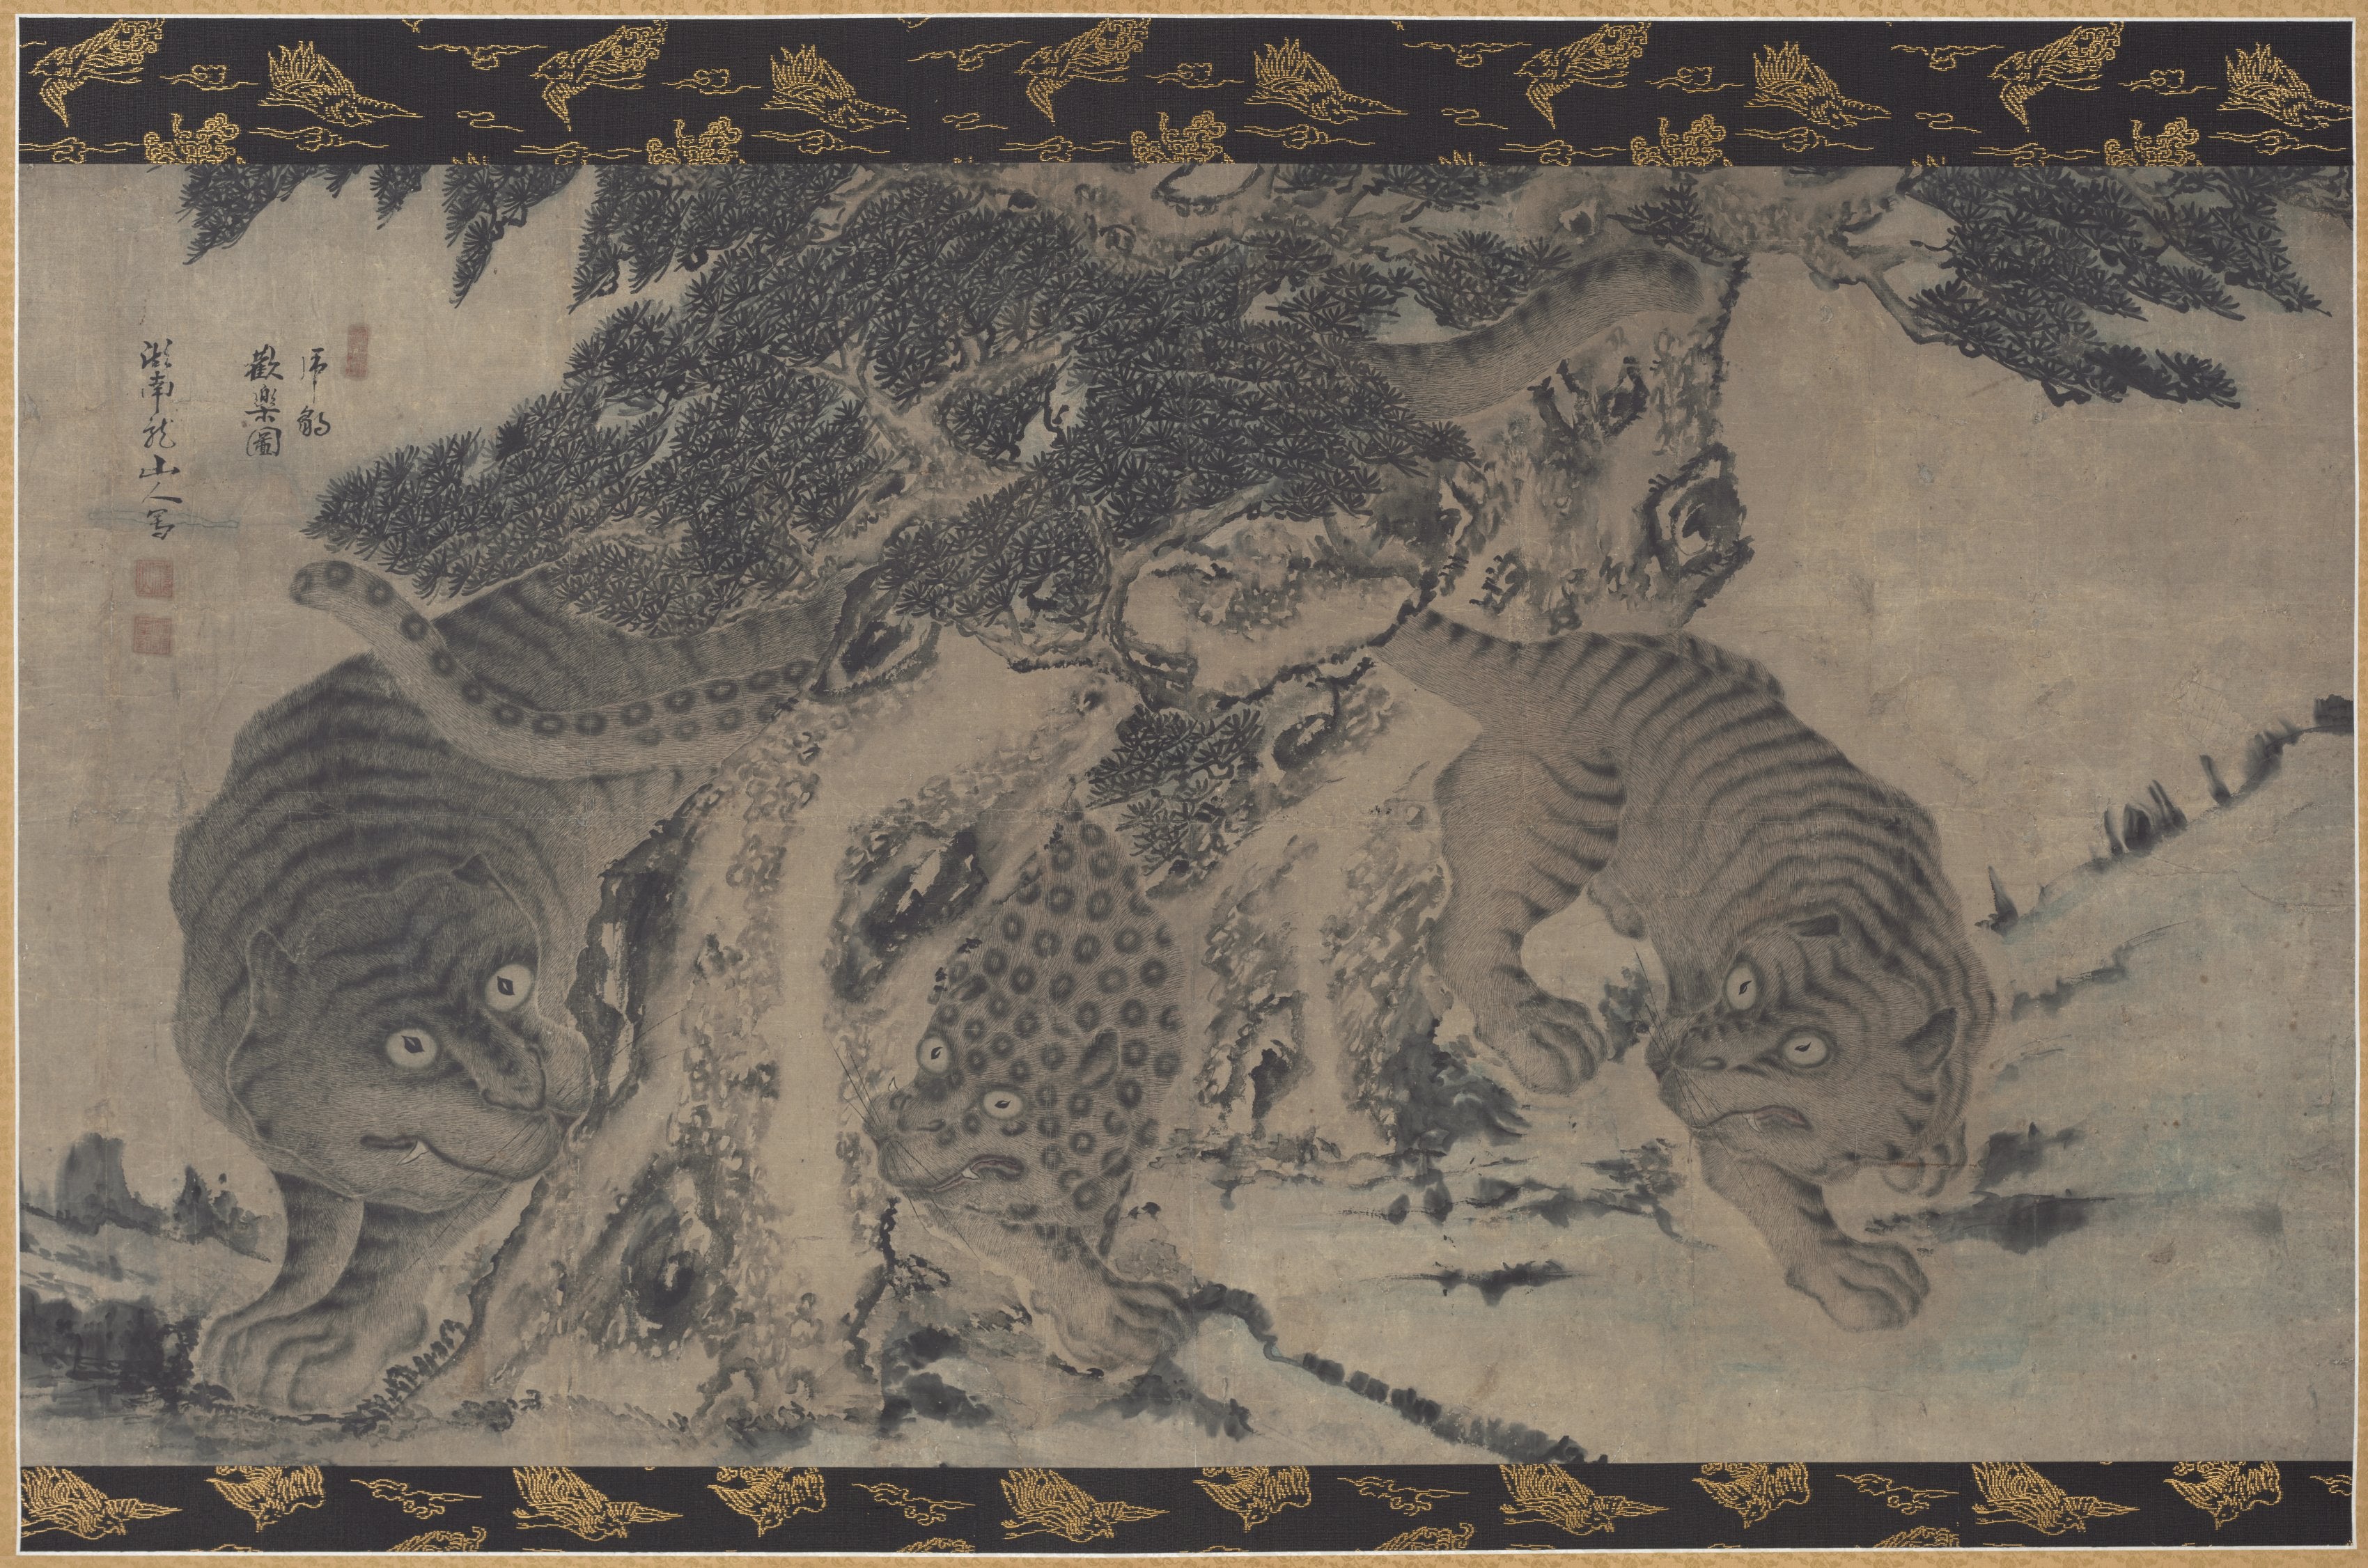 Tigers and Leopard Frolicking 호표도 (虎豹圖)